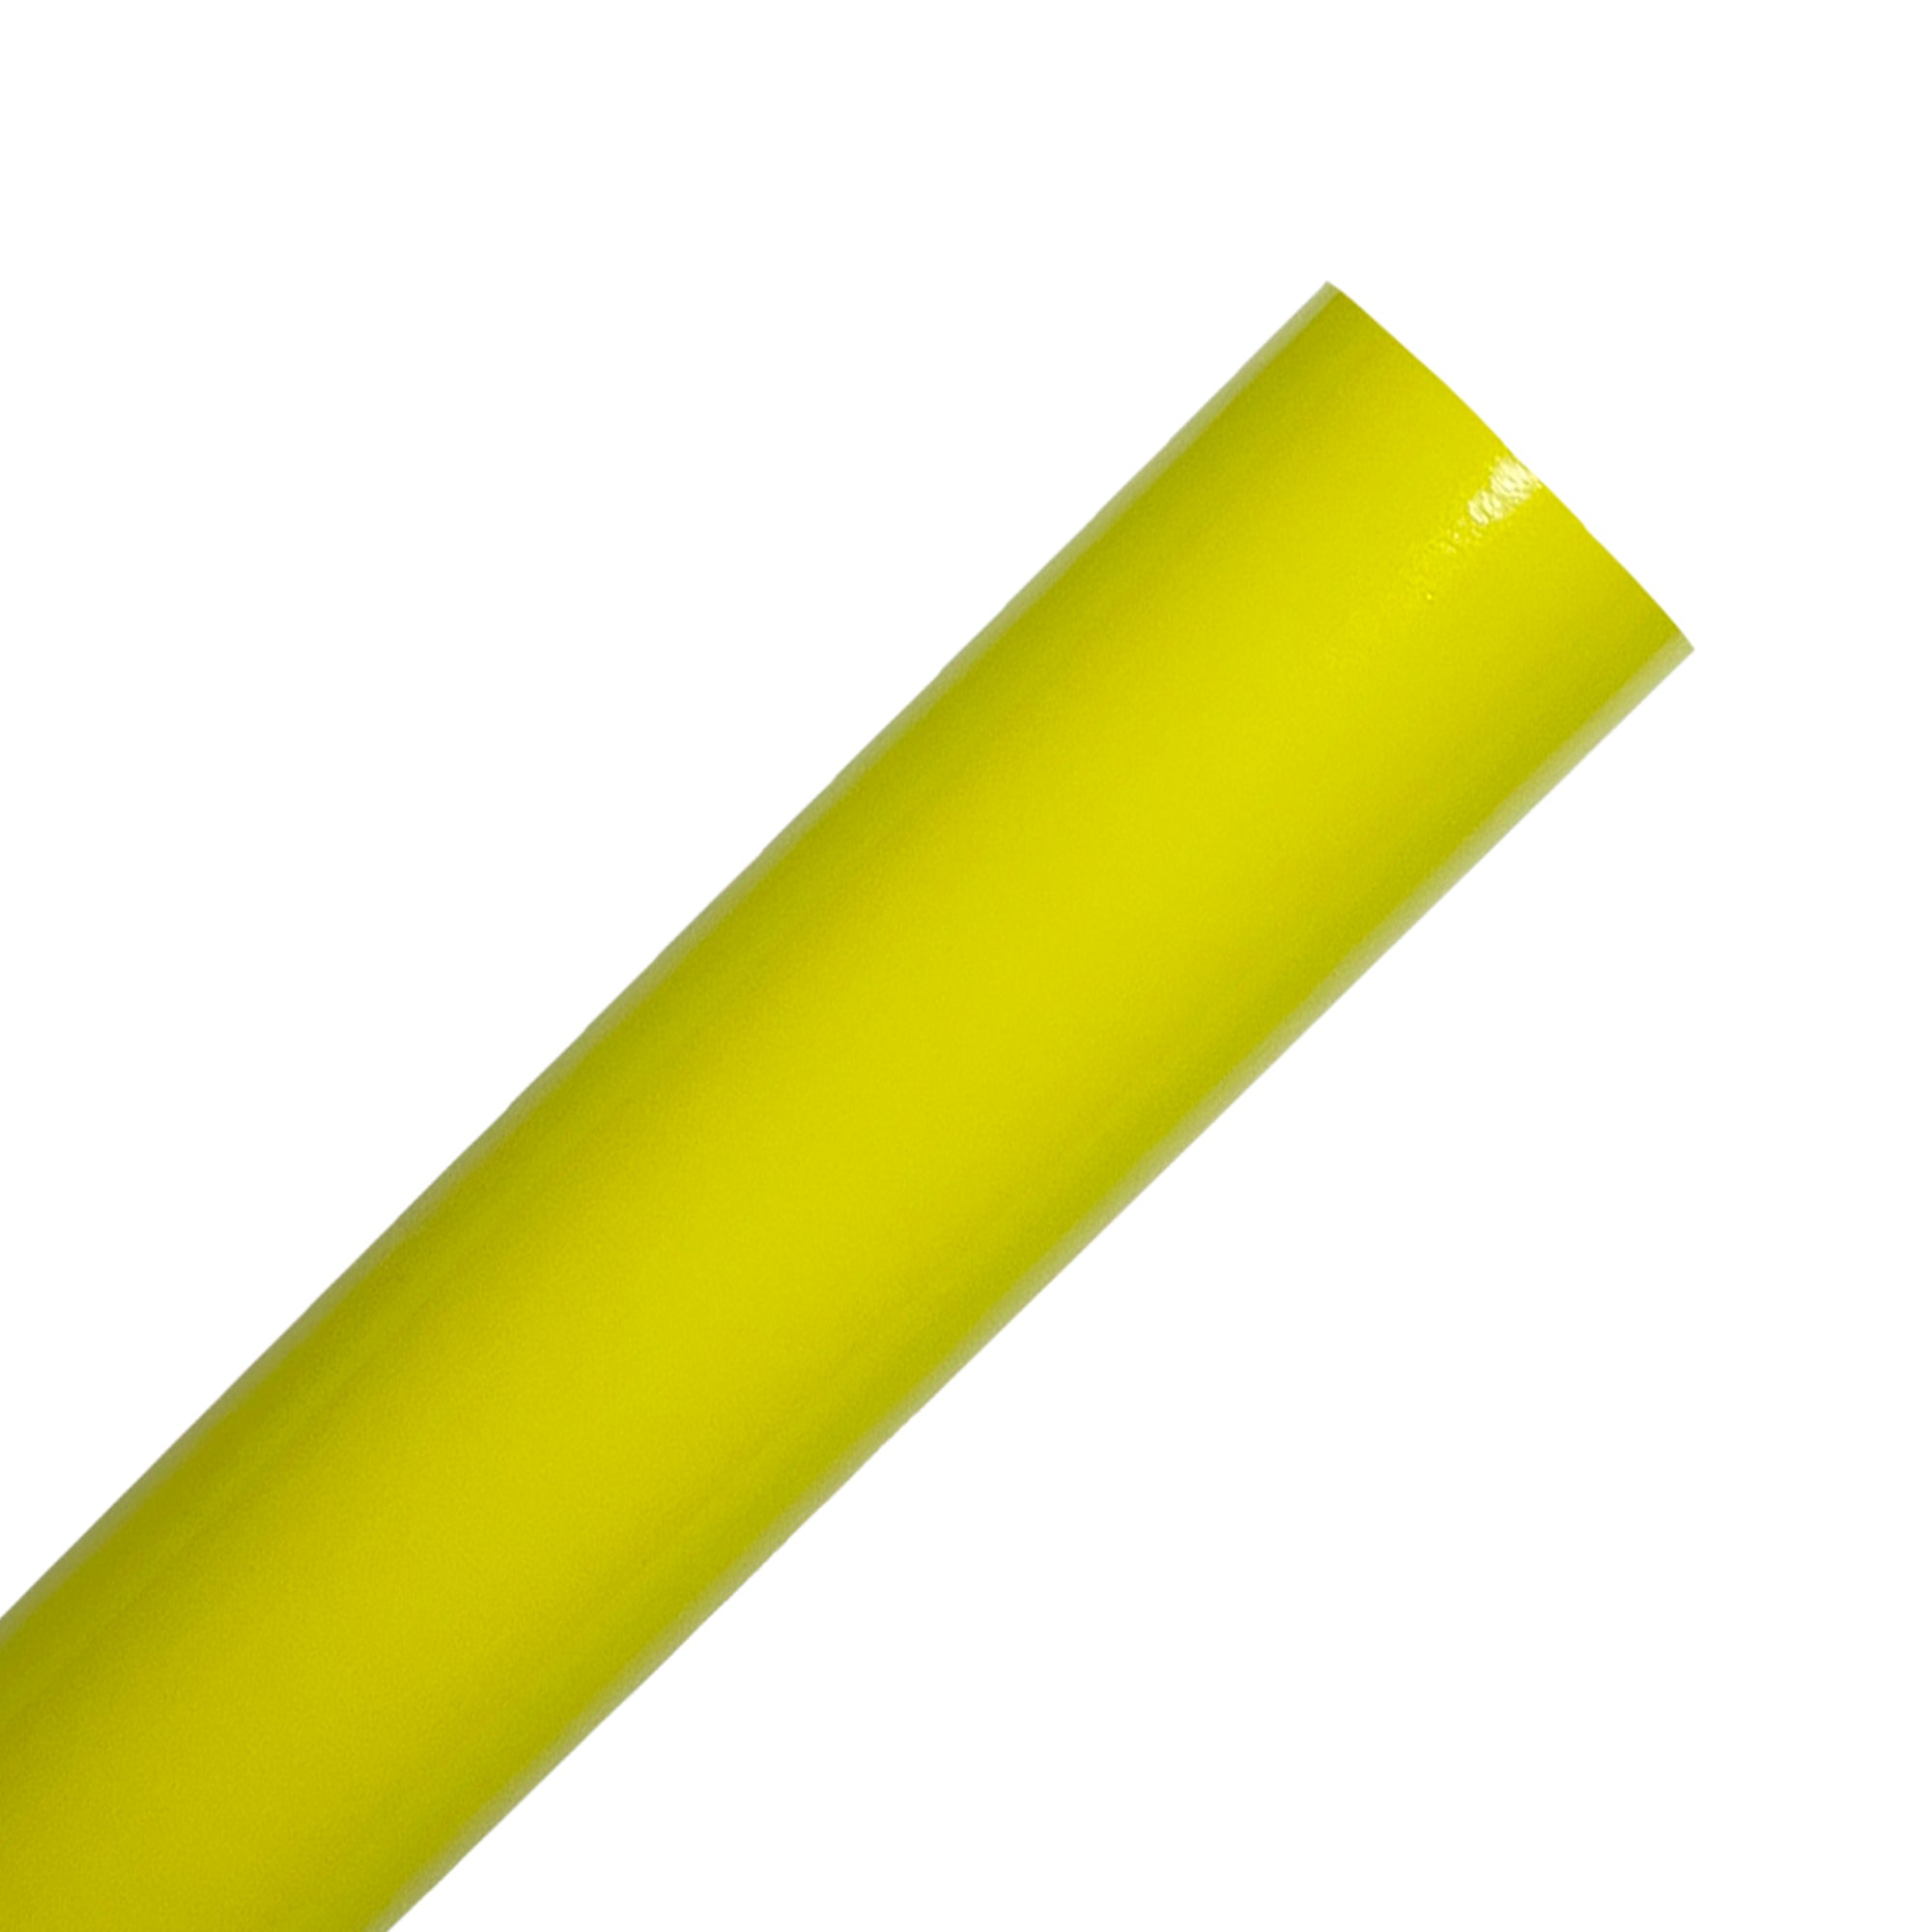 Bright Yellow Adhesive Vinyl Sheets By Craftables – shopcraftables